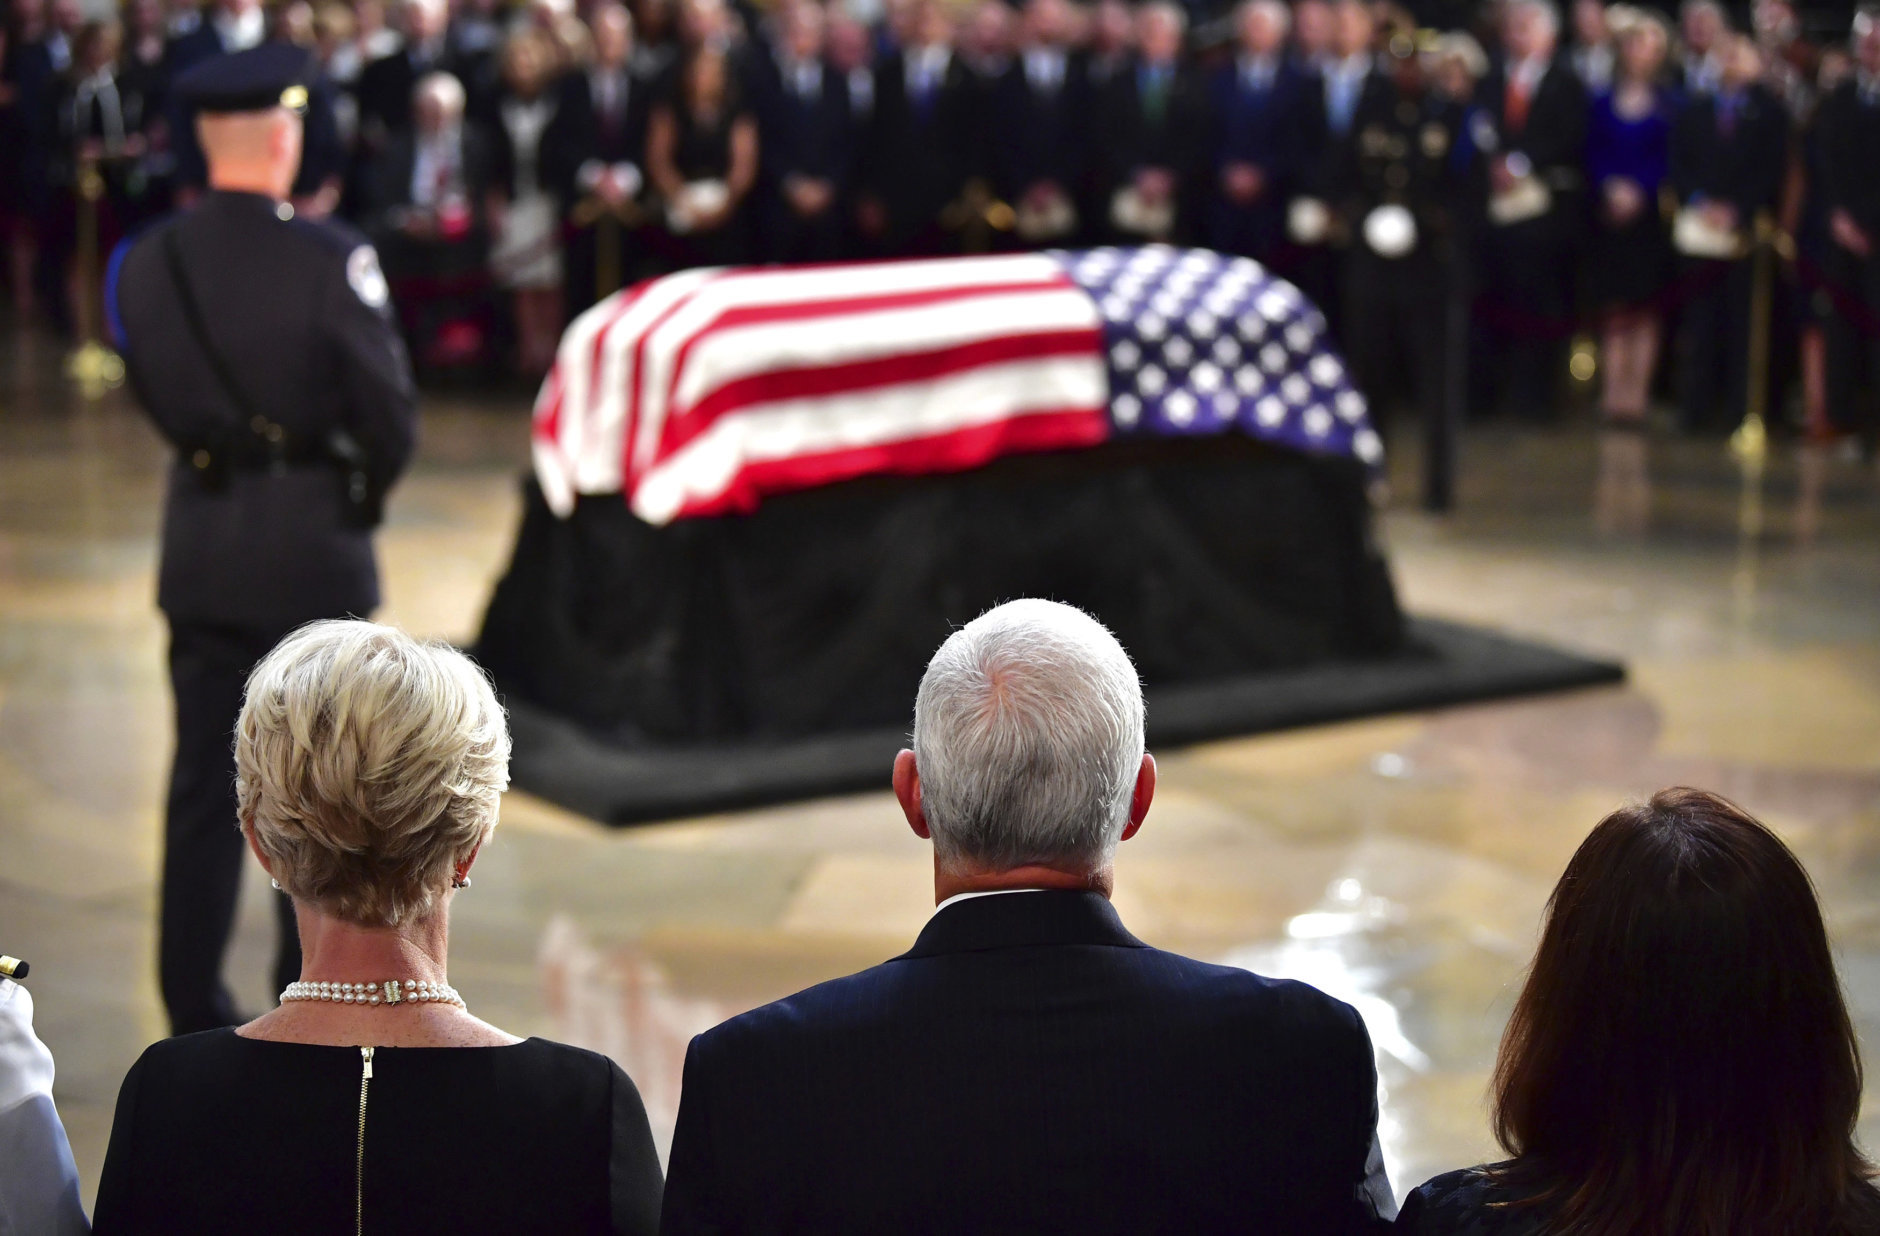 From left, Cindy McCain, Vice President Mike Pence and his wife Karen Pence stand during a ceremony for Sen. John McCain, R-Ariz., as he lies in state in the Rotunda at the U.S. Capitol, in Washington, Friday, Aug. 31, 2018. (Kevin Dietsch/Pool Photo via AP)